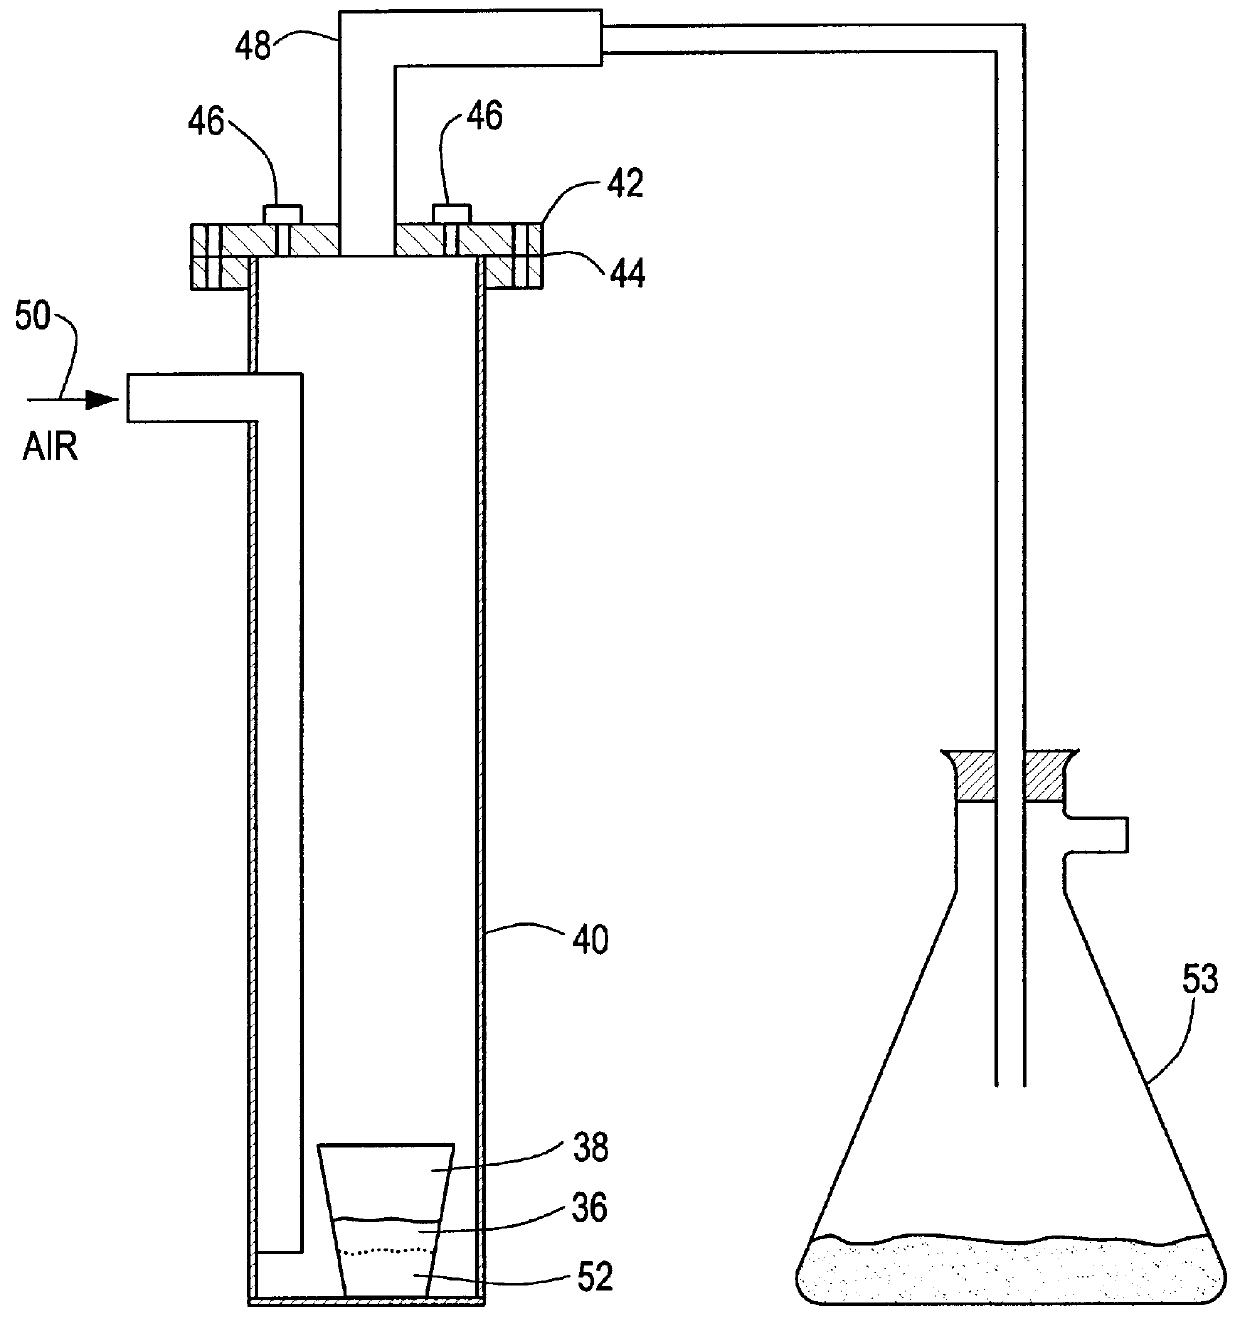 Method for producing uranium oxide from uranium tetrafluoride and a phyllosilicate mineral